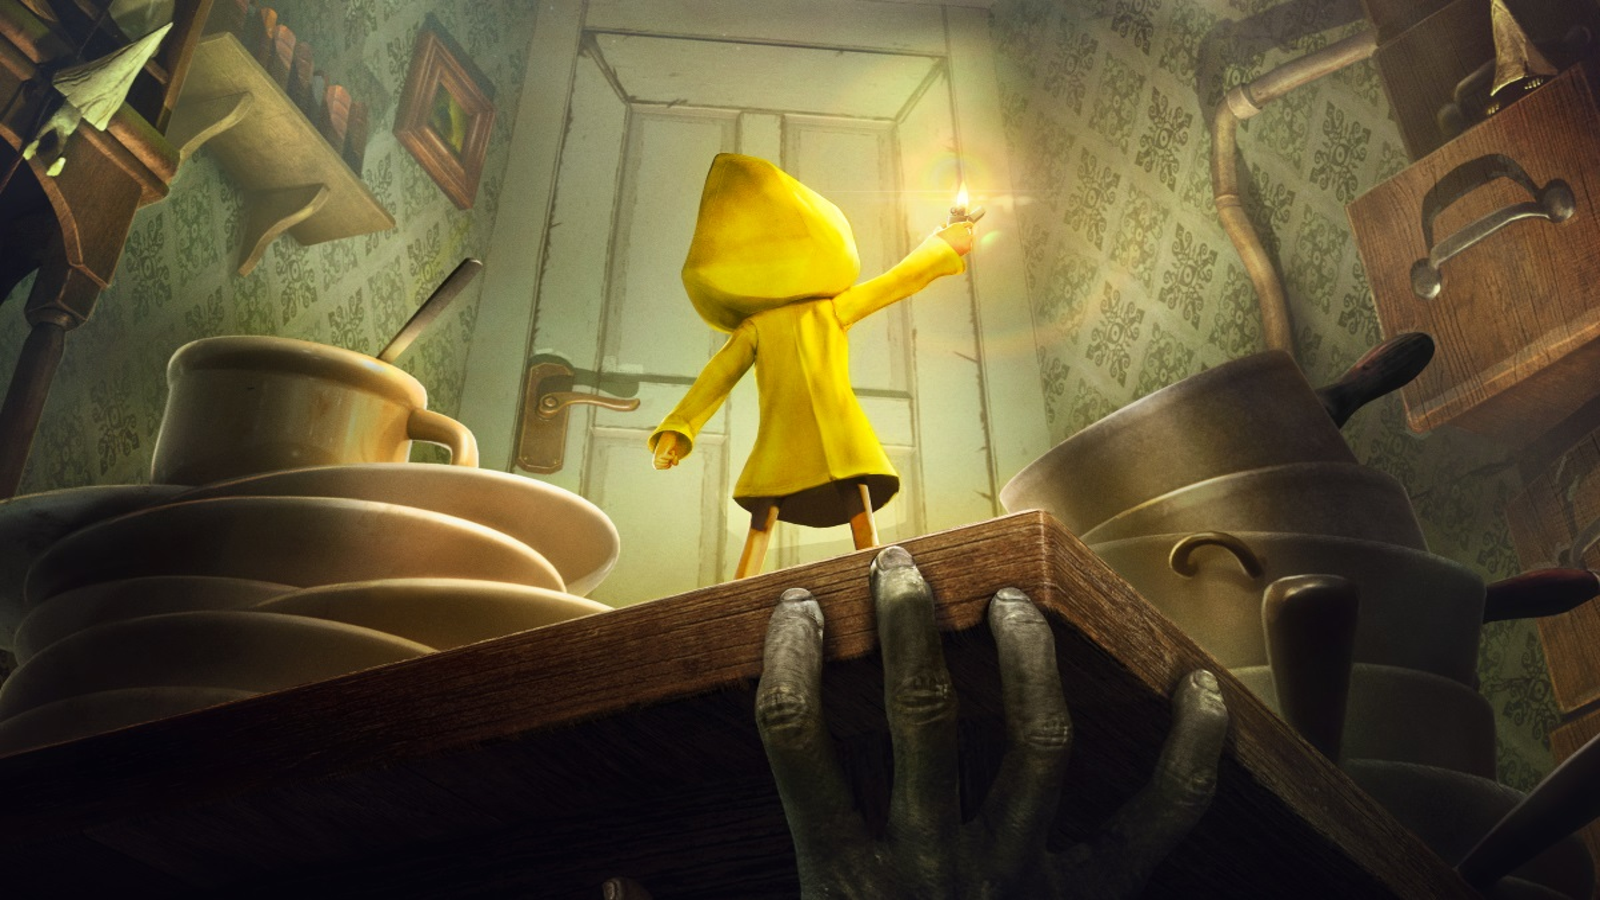 TRAILER: The Cute And Creepy World Of Little Nightmares Comes To Mobile